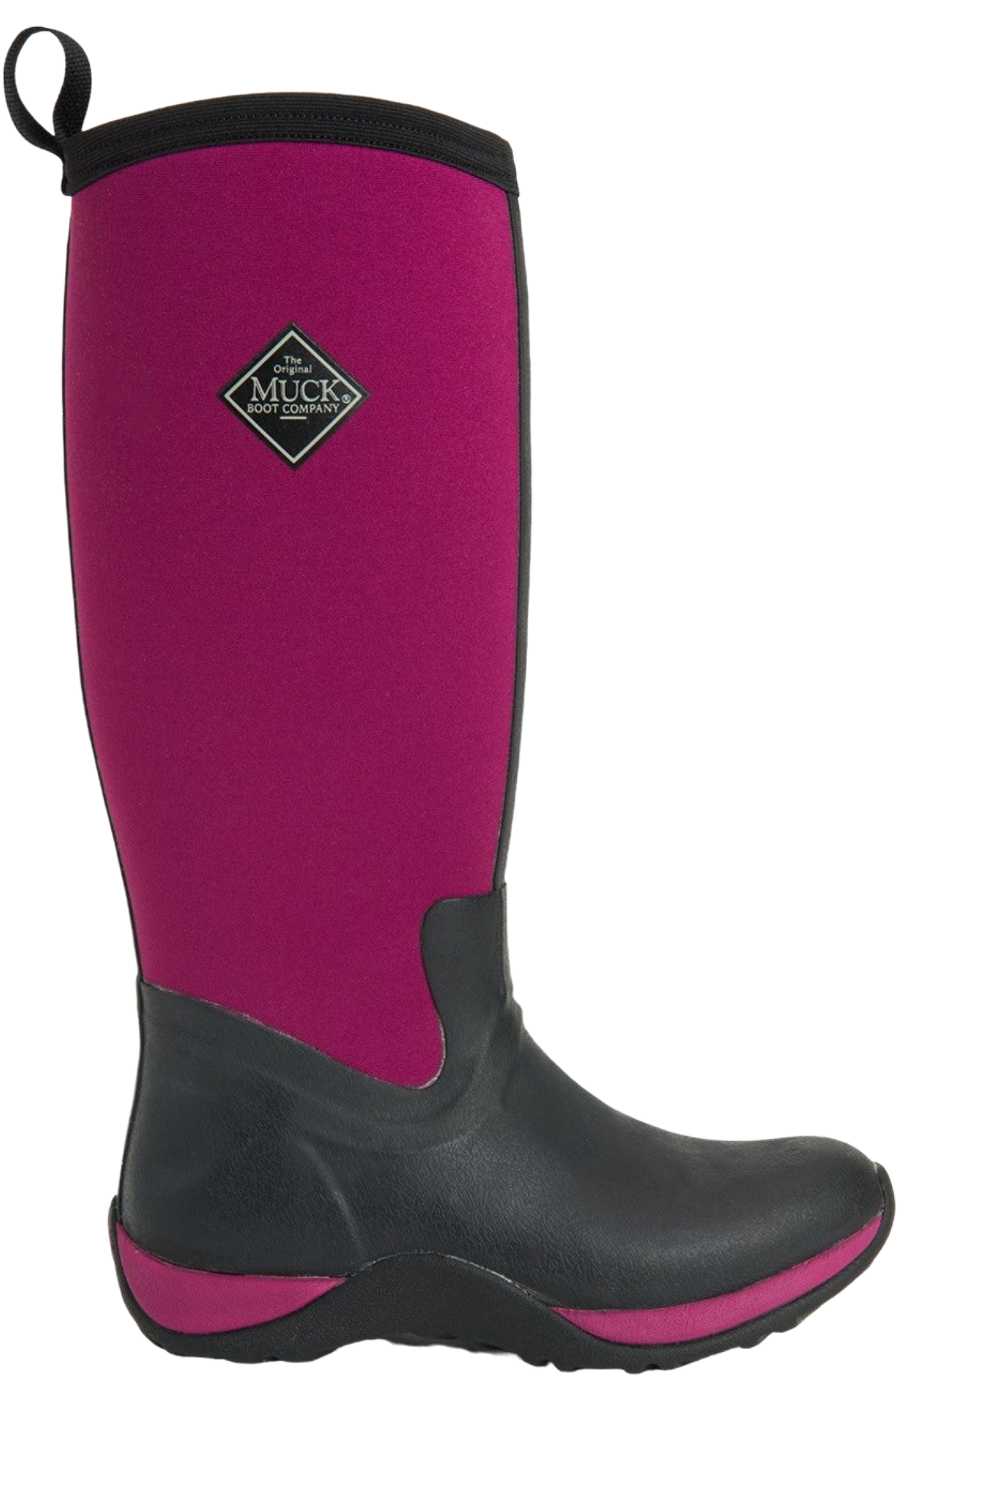 Muck Boots Womens Arctic Adventure Tall Boots in Black Maroon 